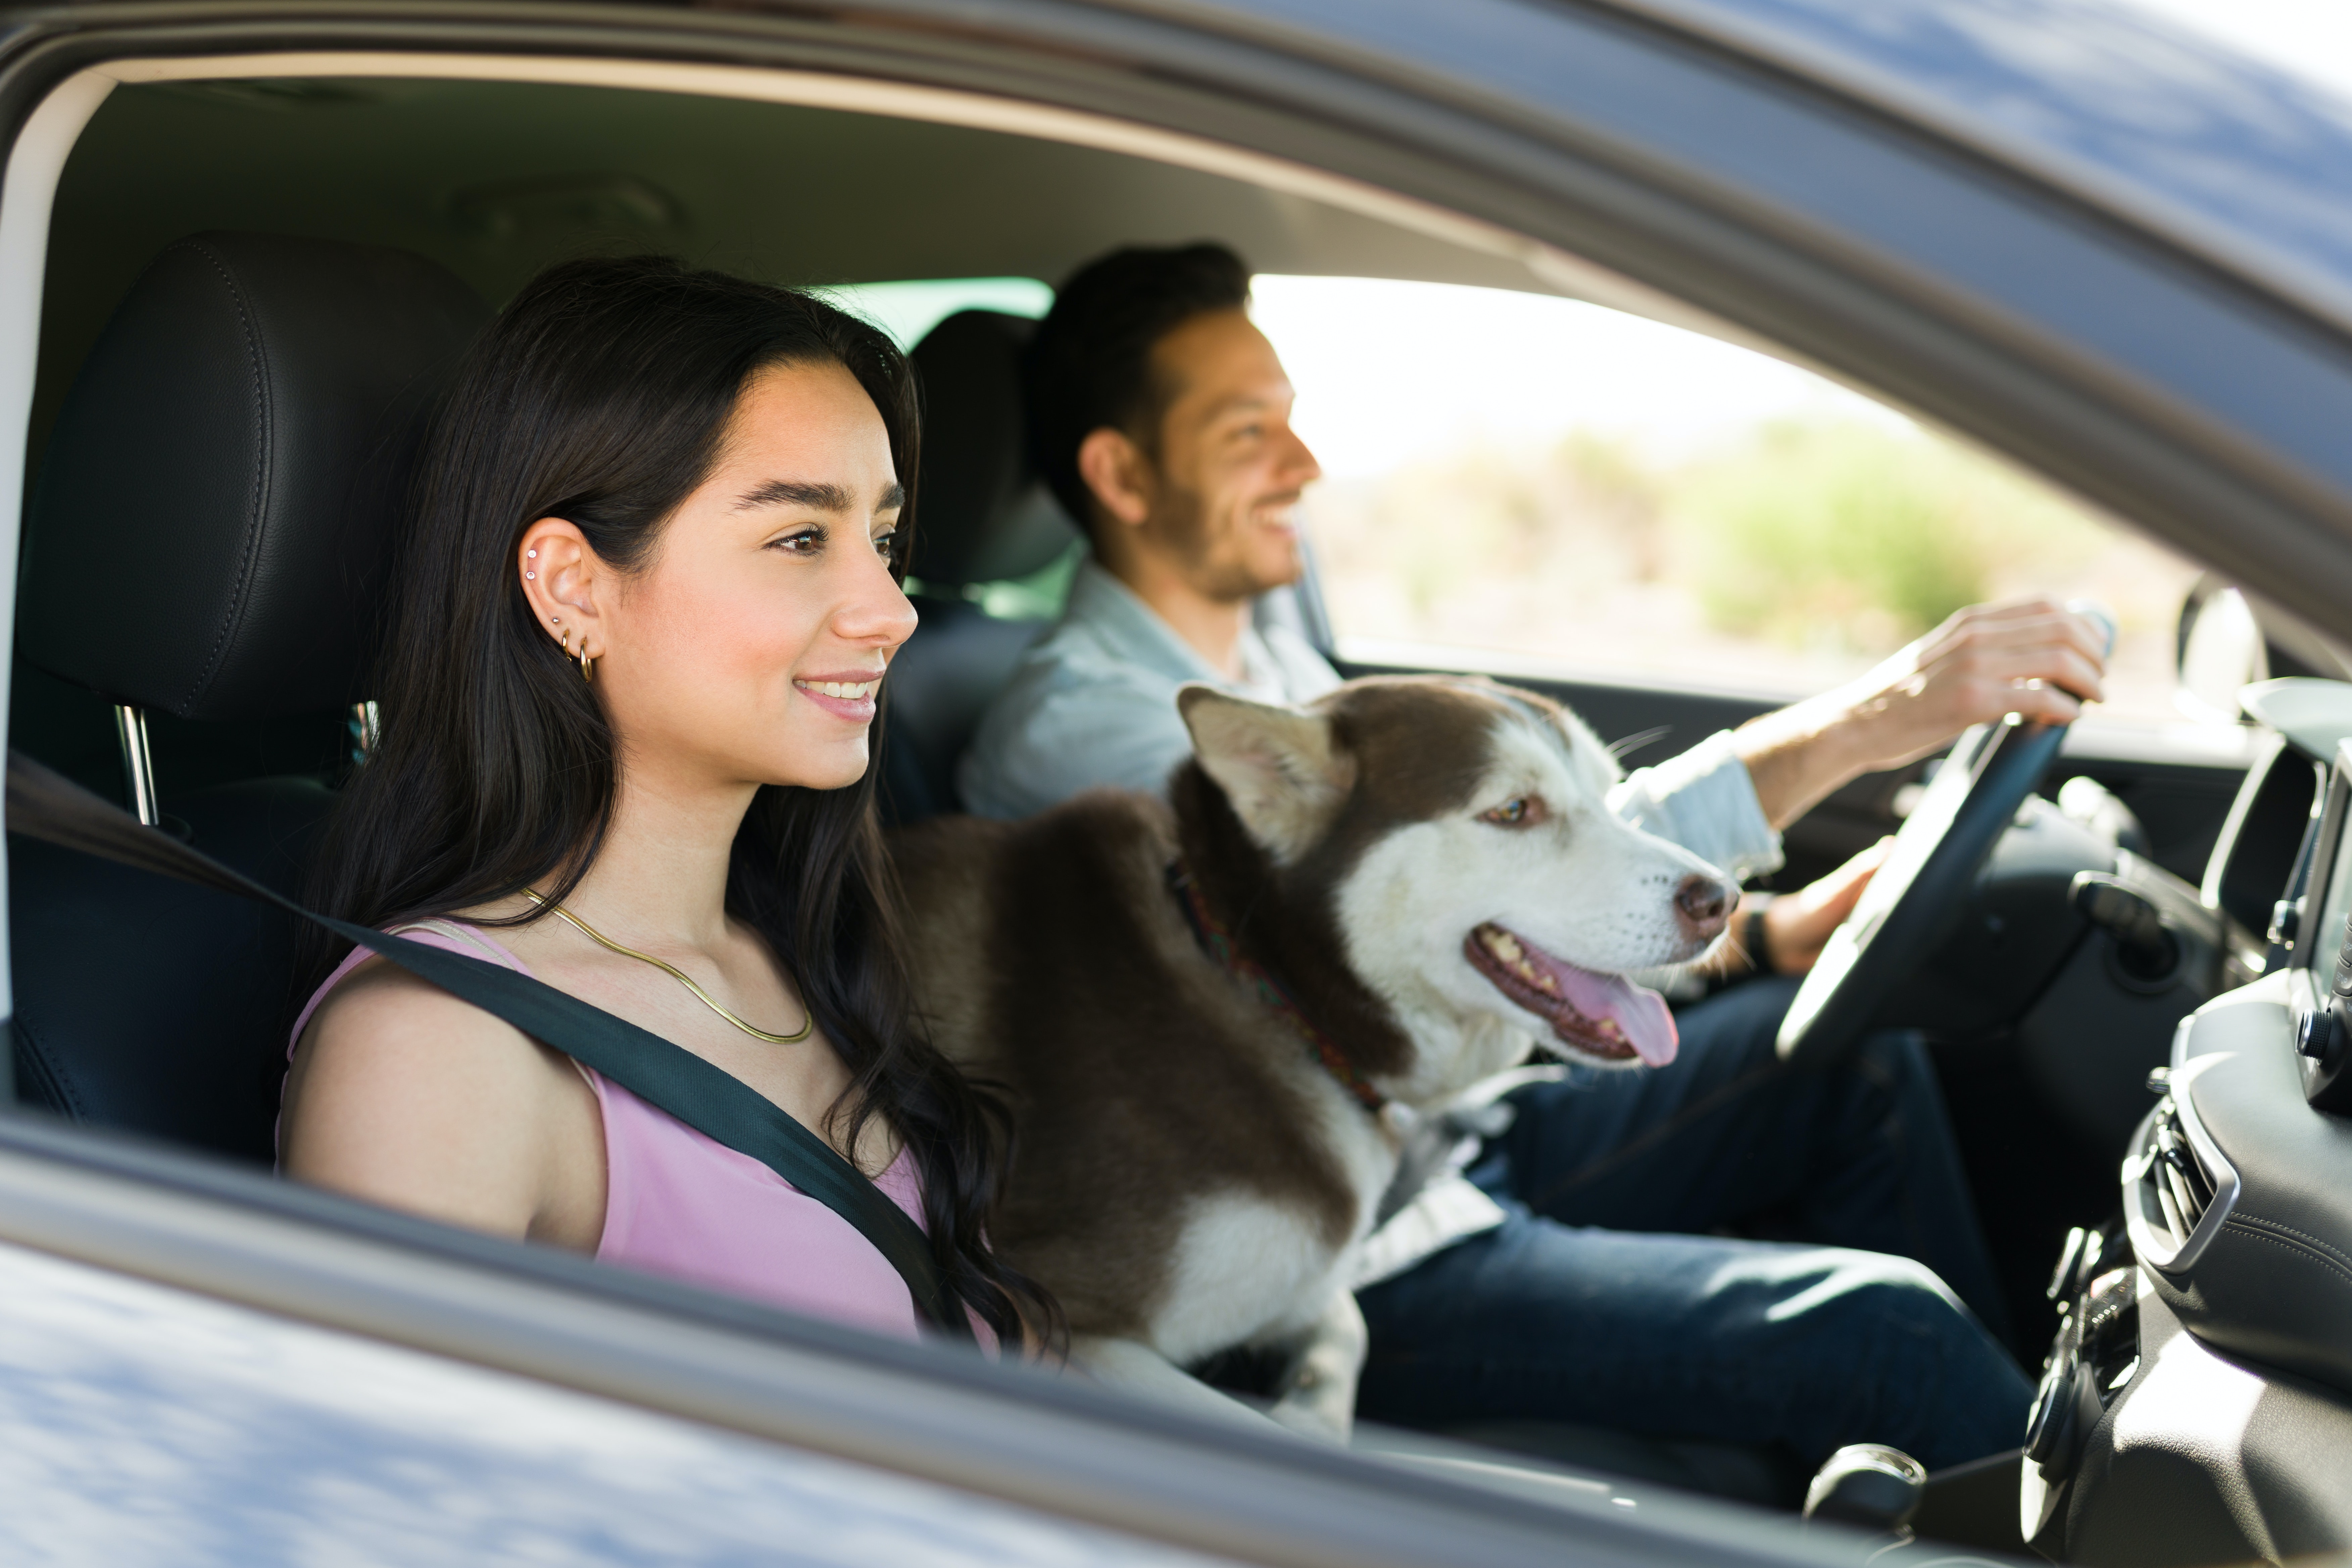 Couple driving in car with dog in between them